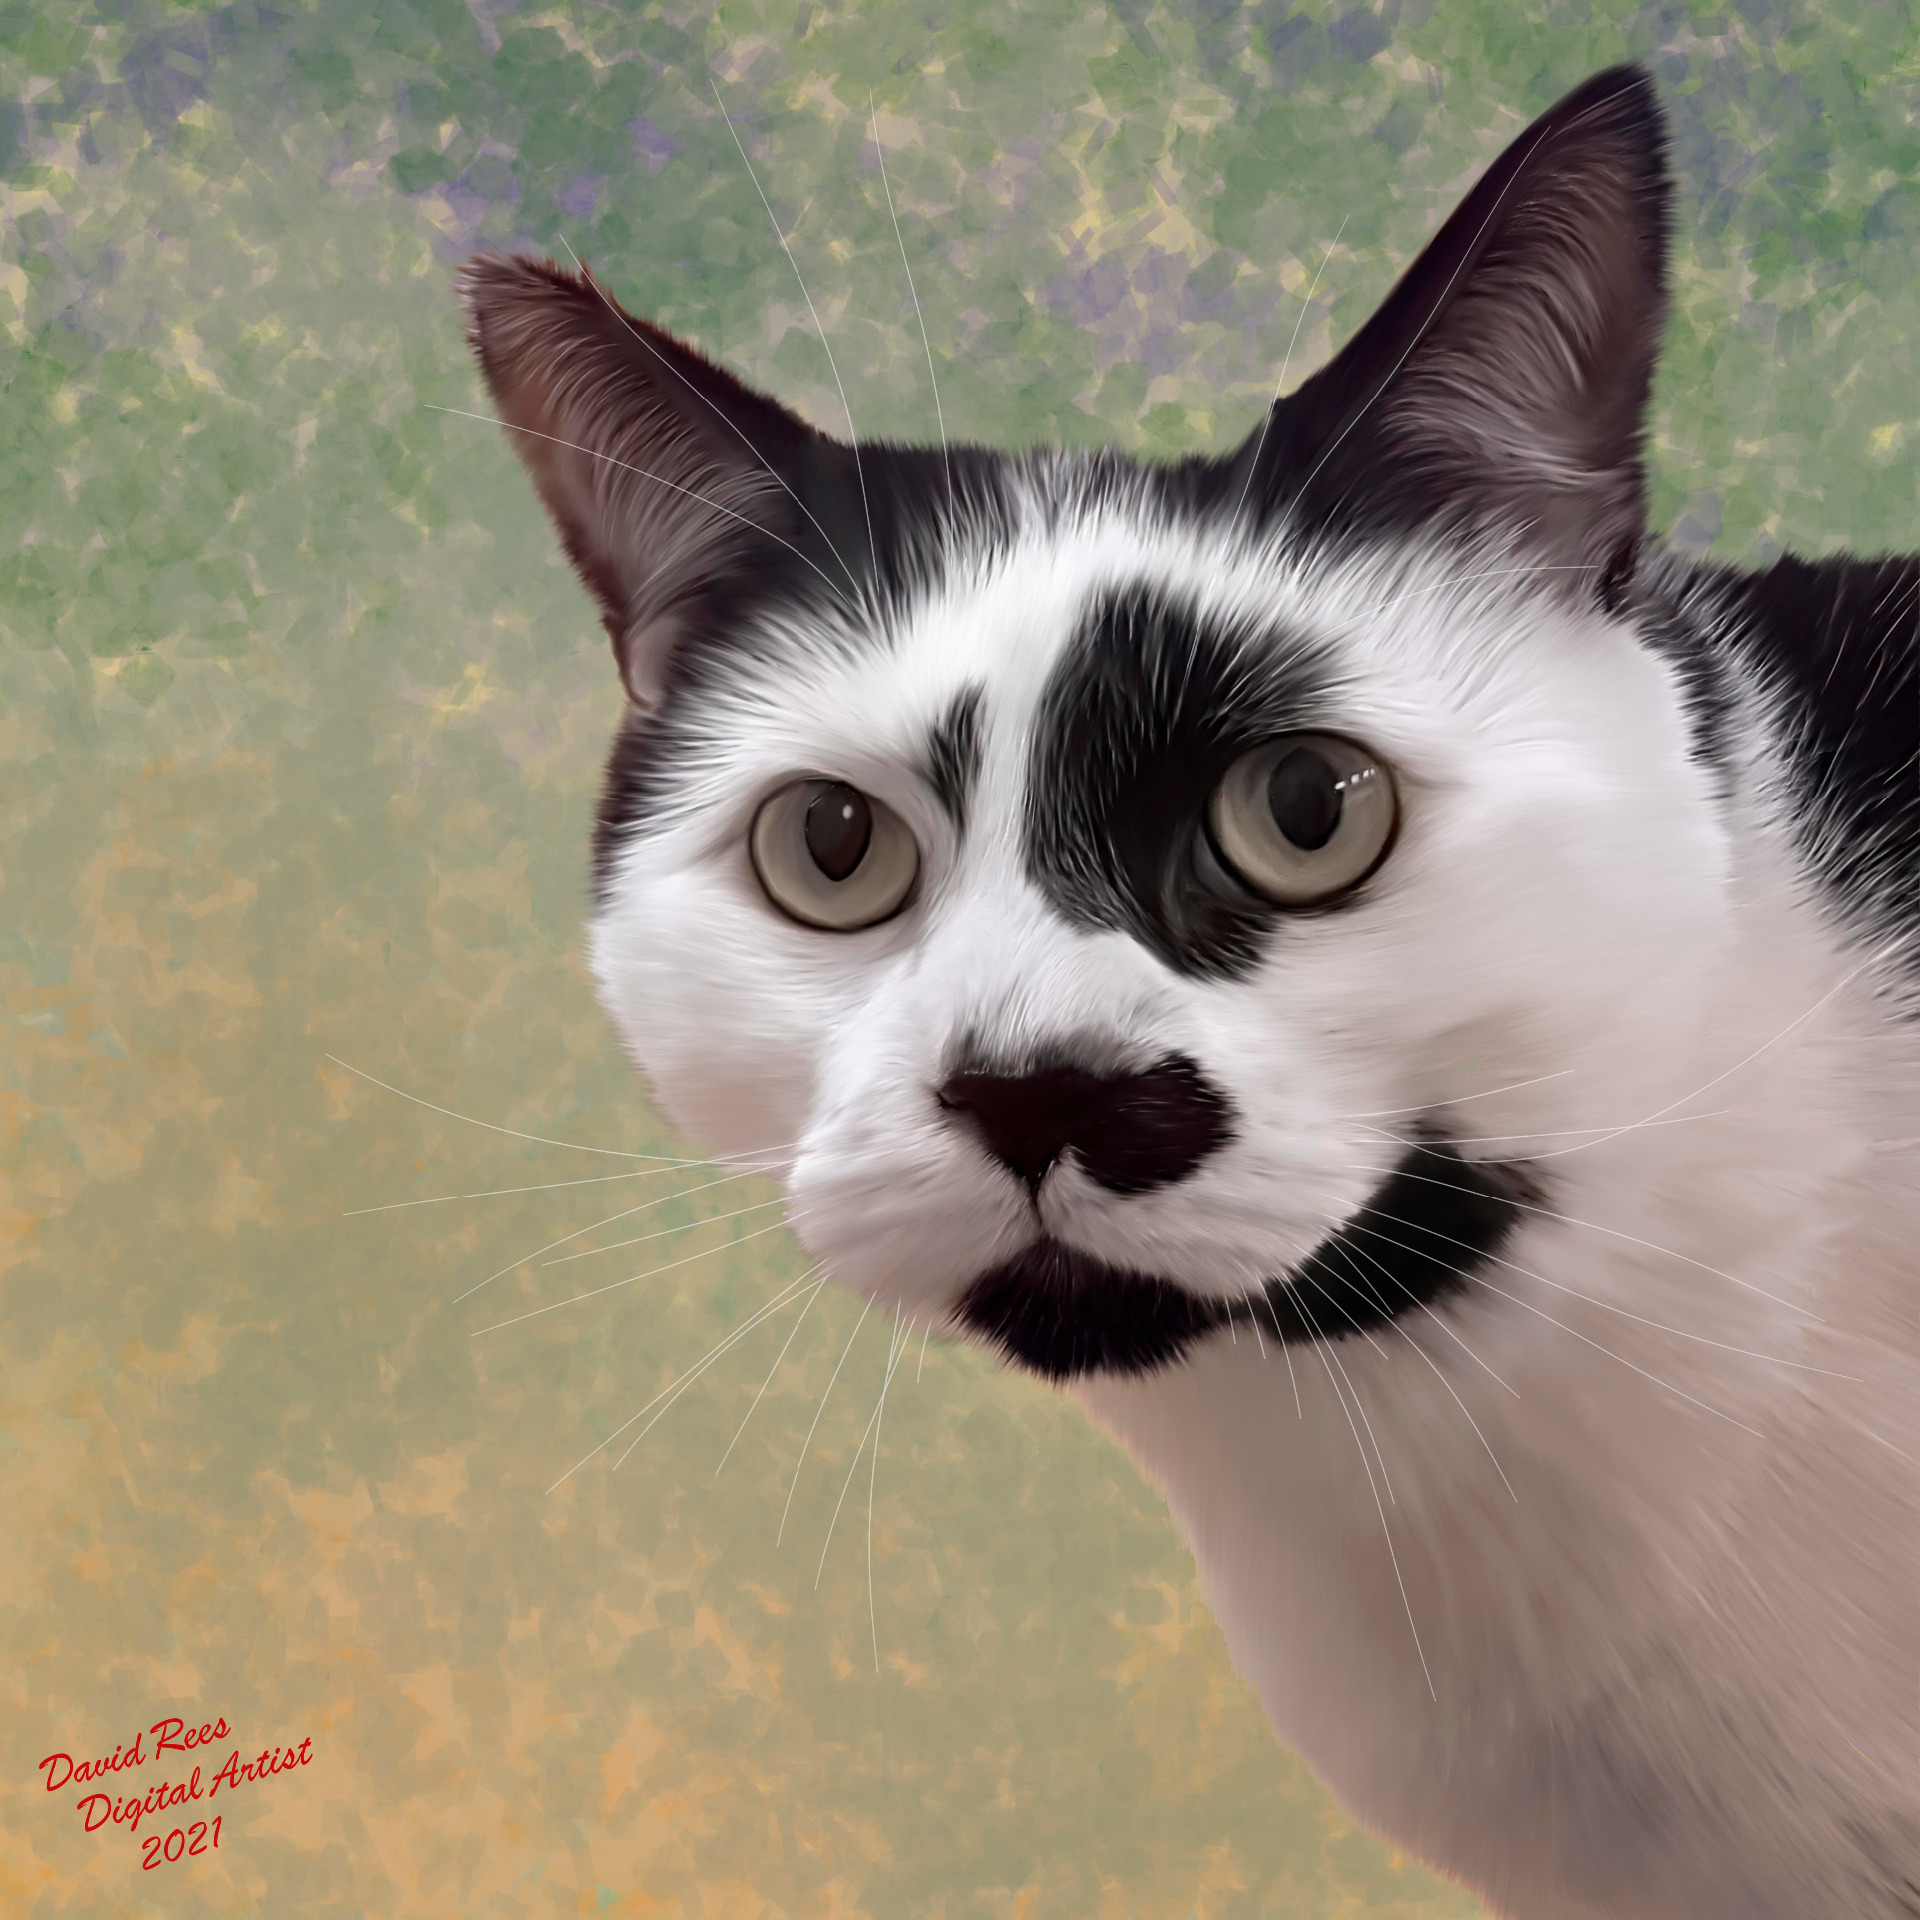 Paintings of cats, dogs and other household pets